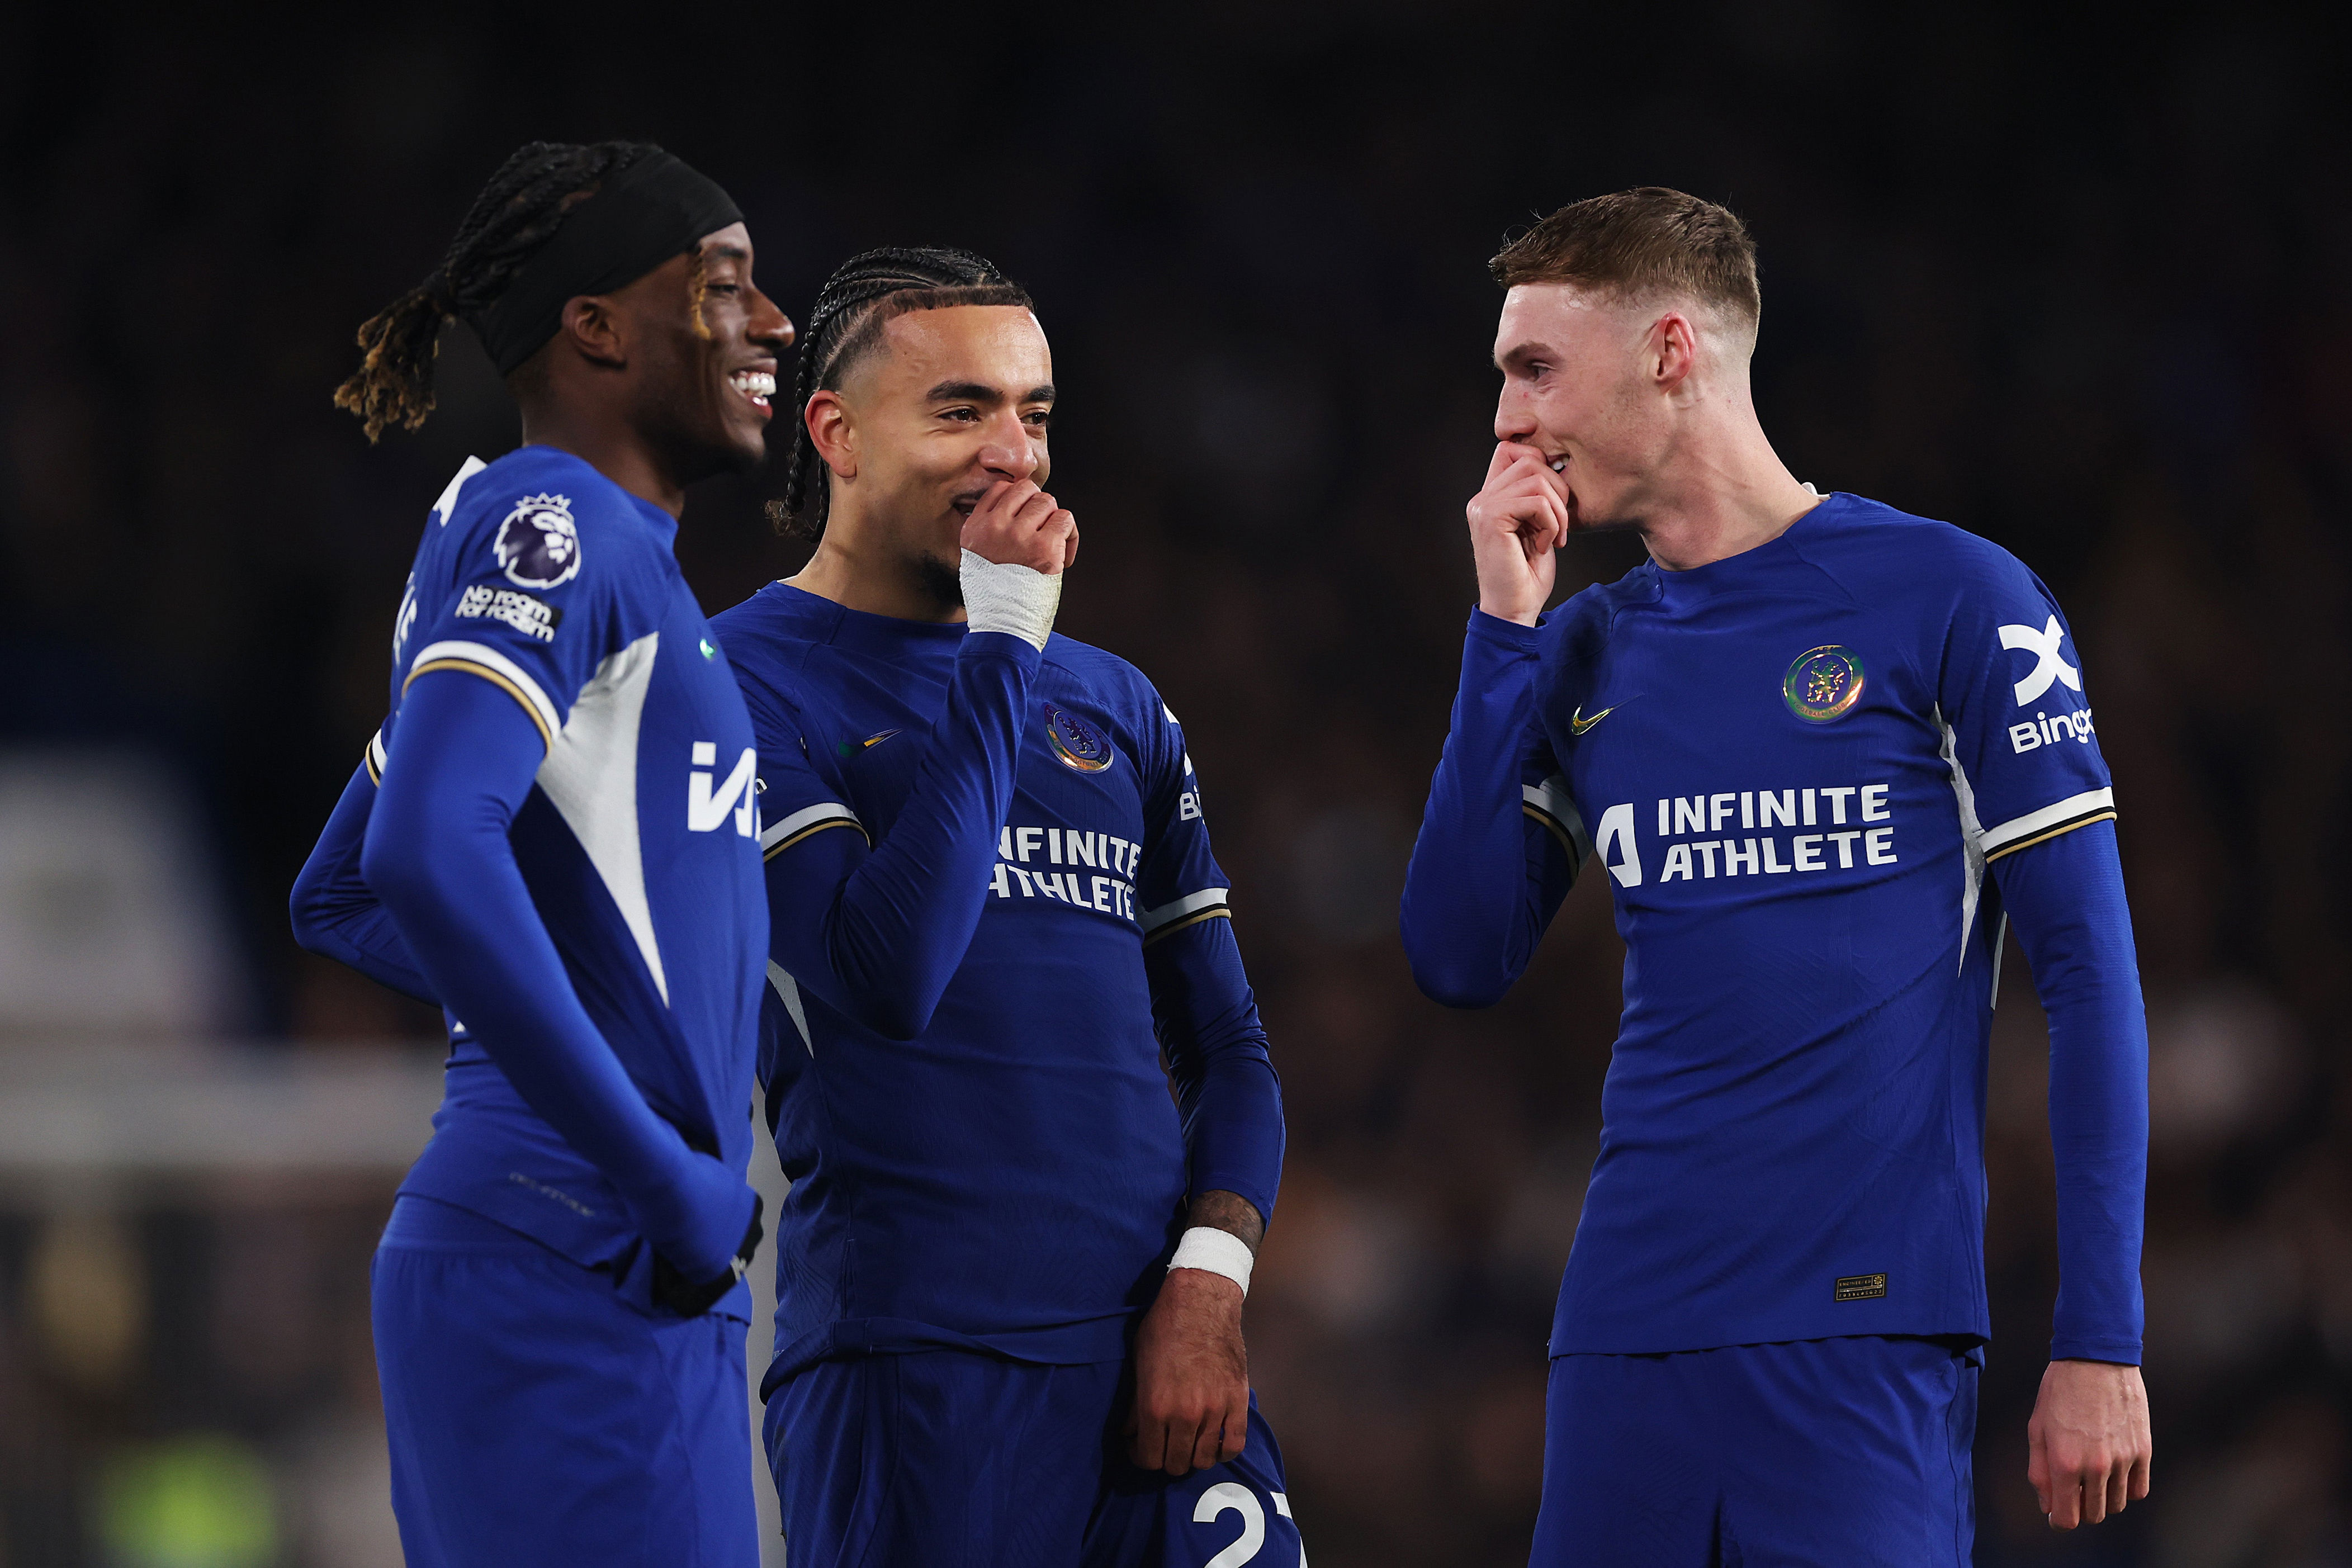 cole palmer reveals the 'amazing' teammate he voted for in chelsea's player's player of the year award